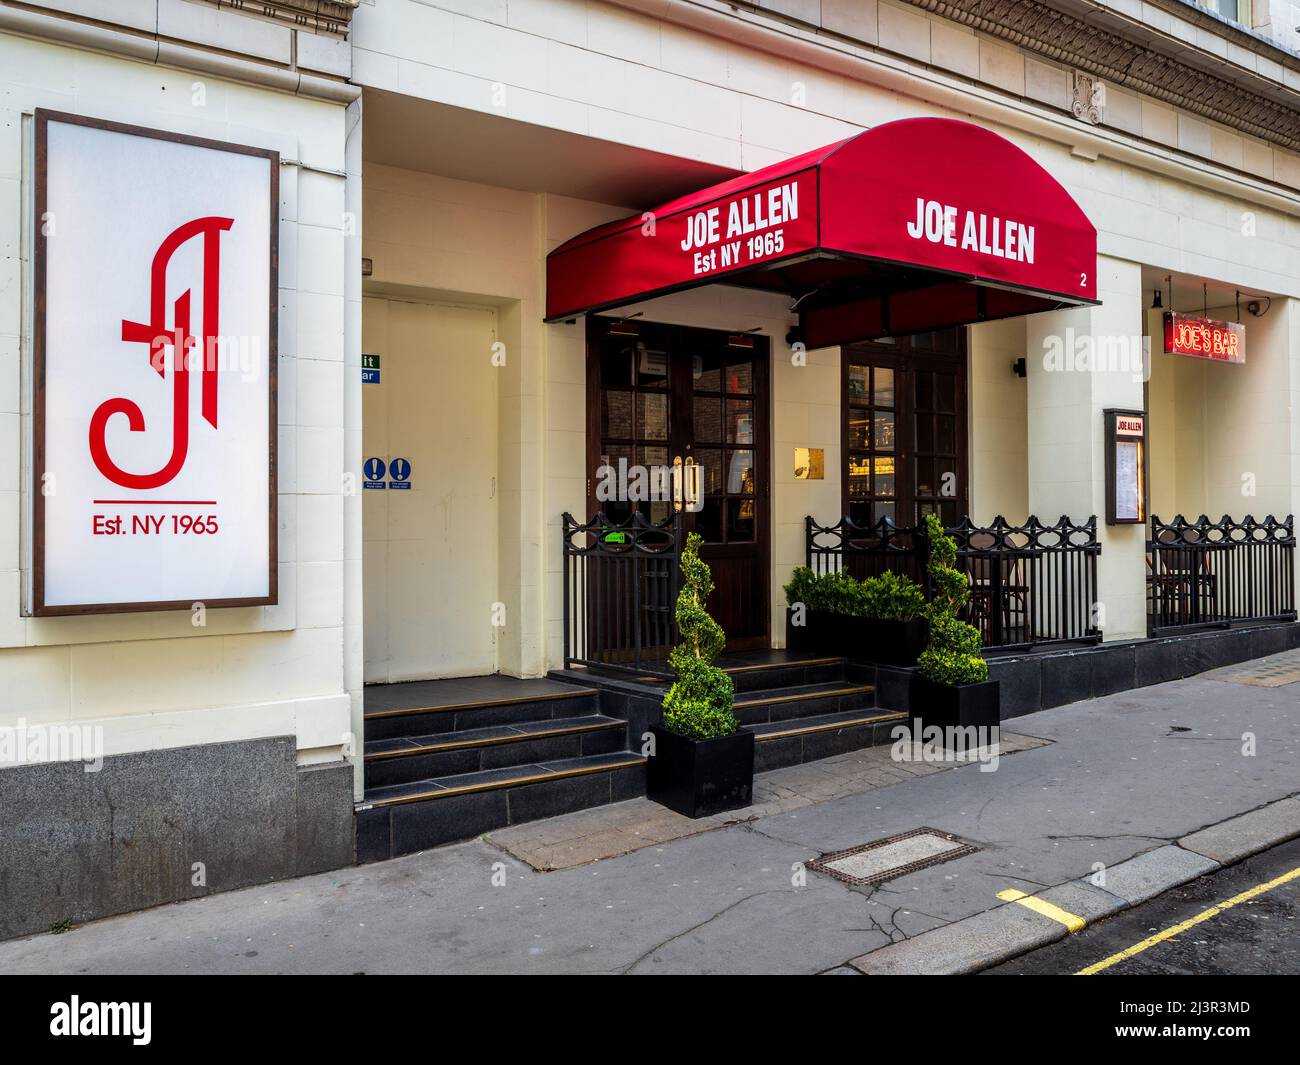 Joe Allen Bar & Restaurant on Burleigh St between the Strand and Covent Garden in Central London - NY style London restaurant, opened 1977. Stock Photo